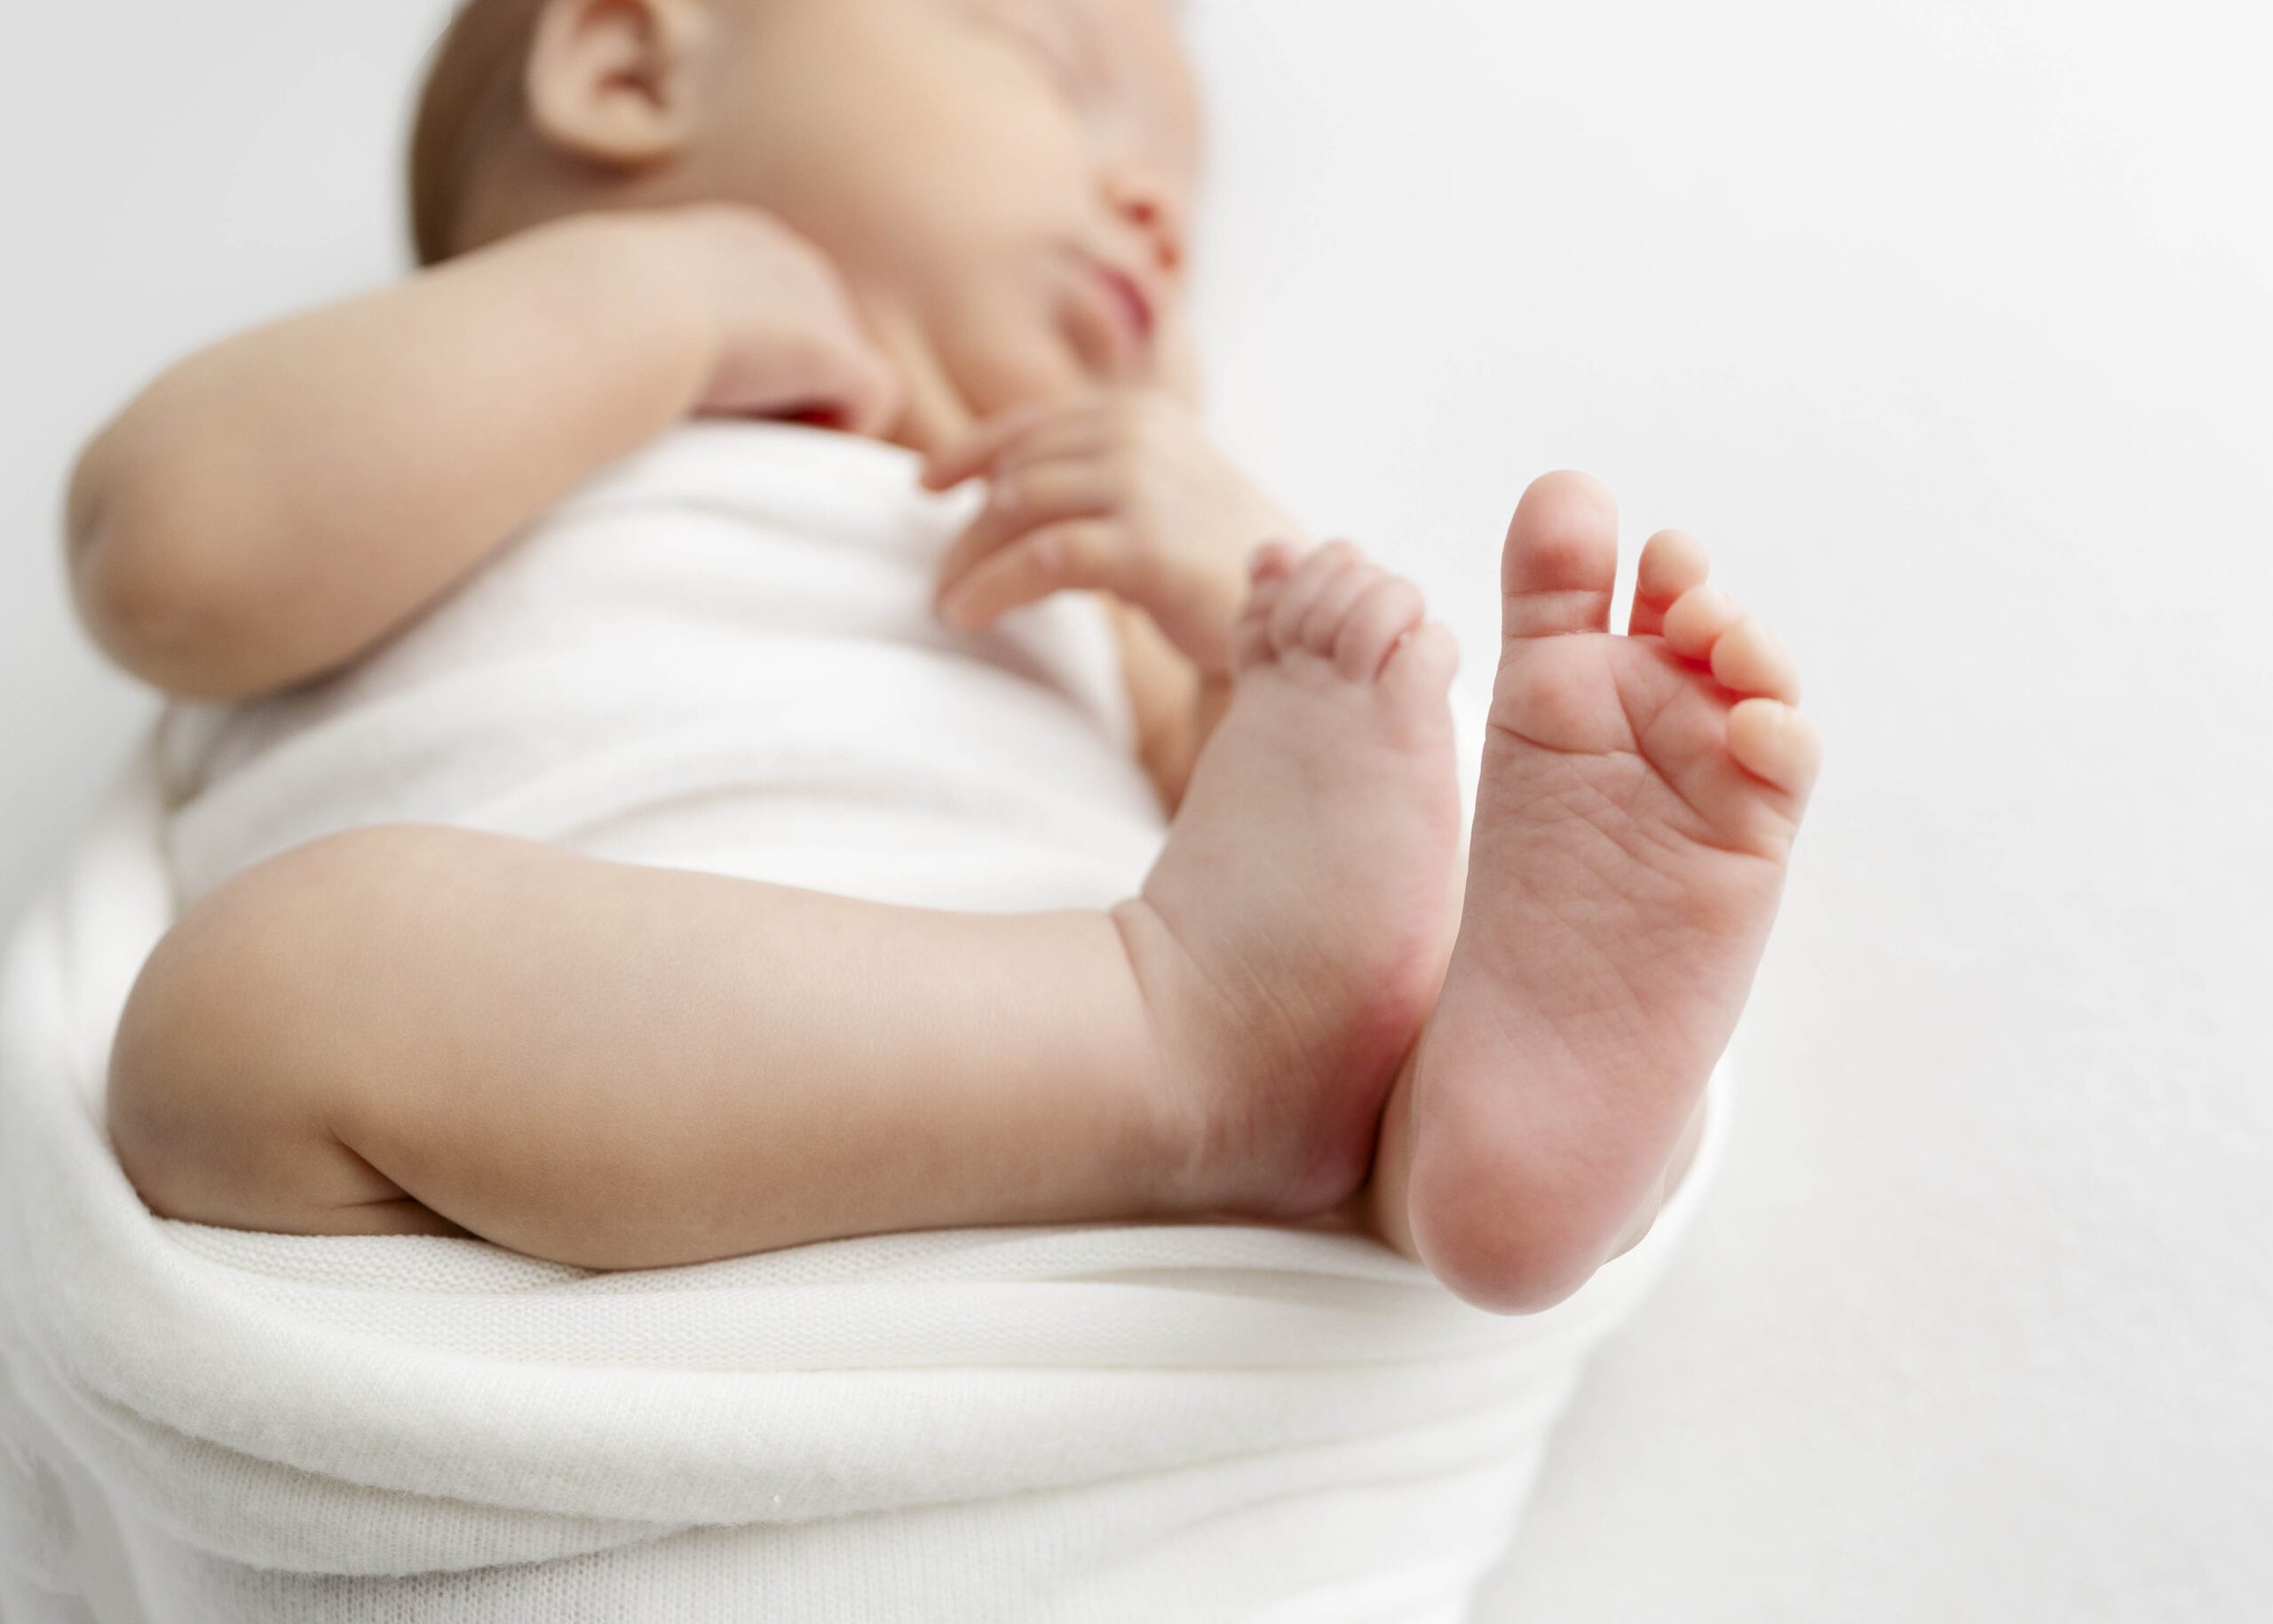 newborn baby sleeping with toes in focus and head blurred